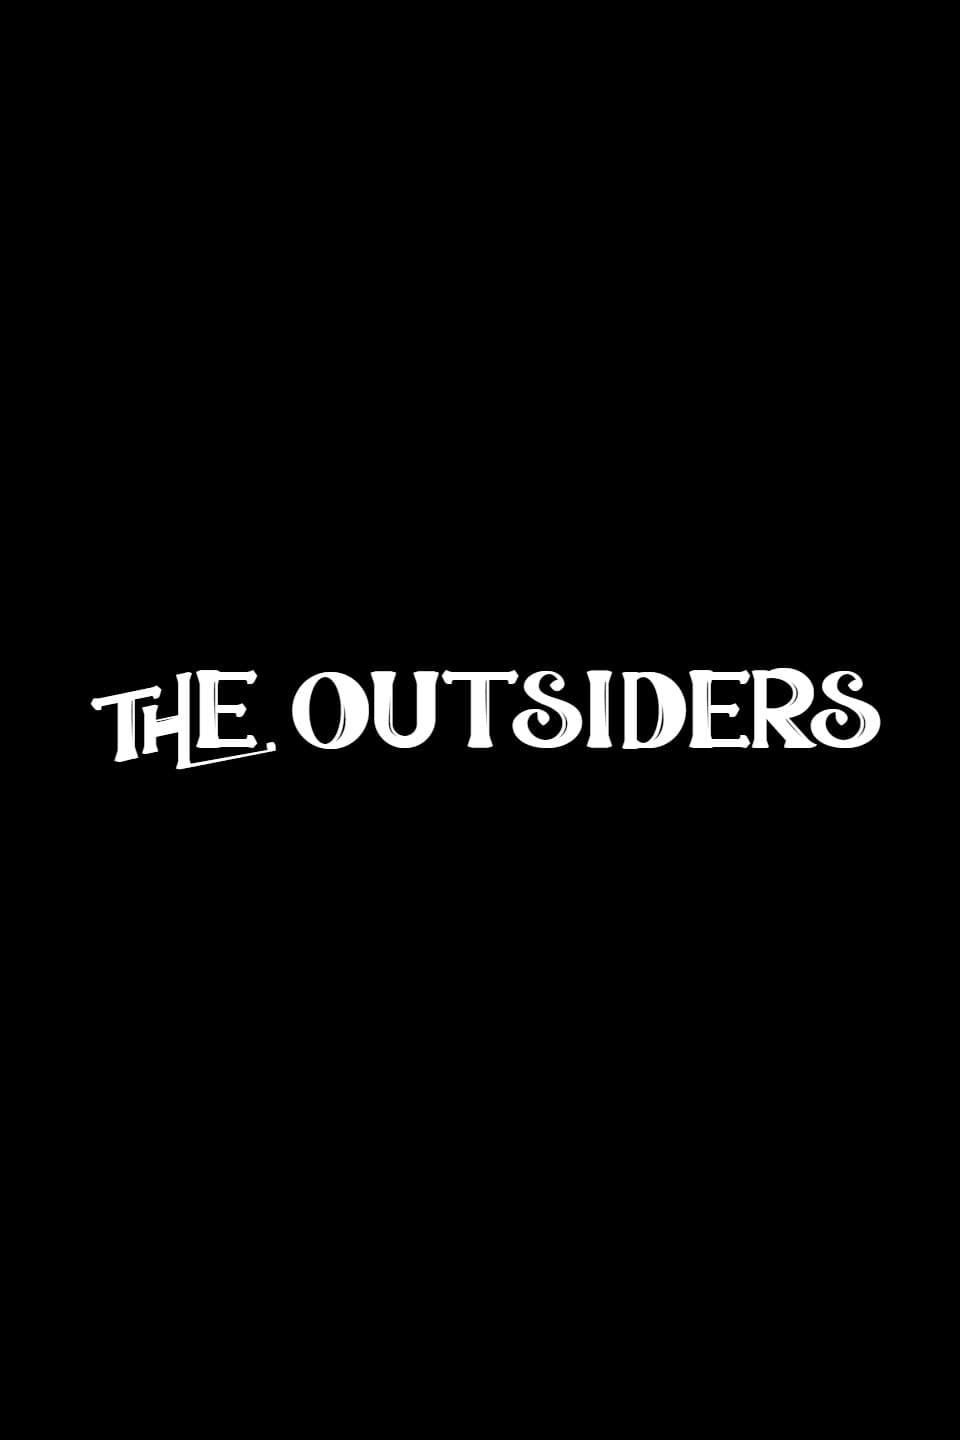 The Outsiders poster